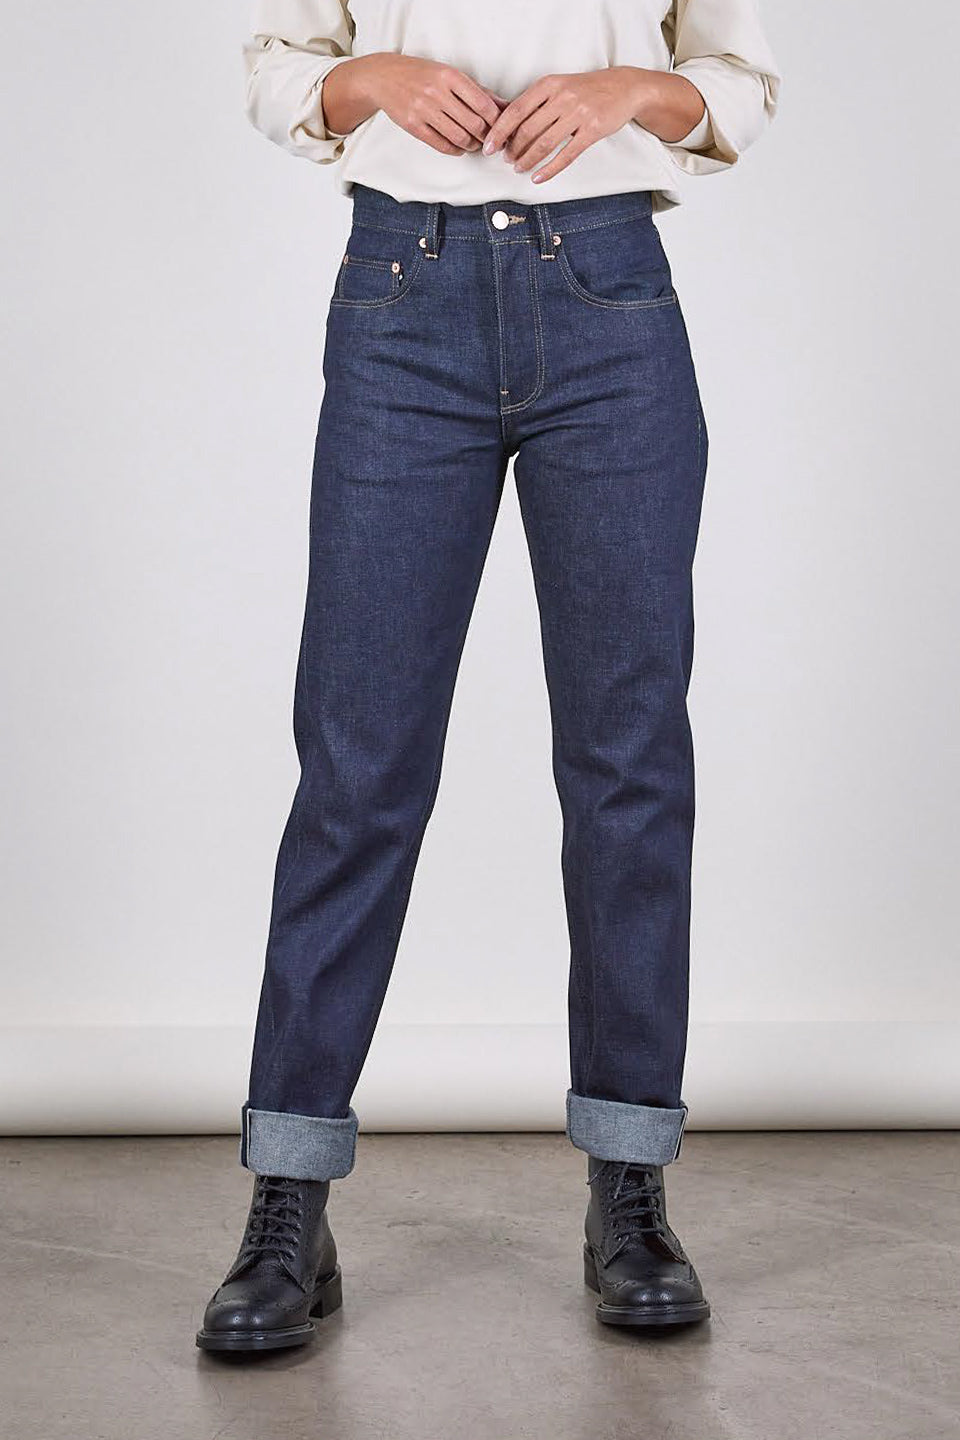 WC2 Relaxed Tapered Indigo 14oz Japanese Raw Selvedge Womens Jeans